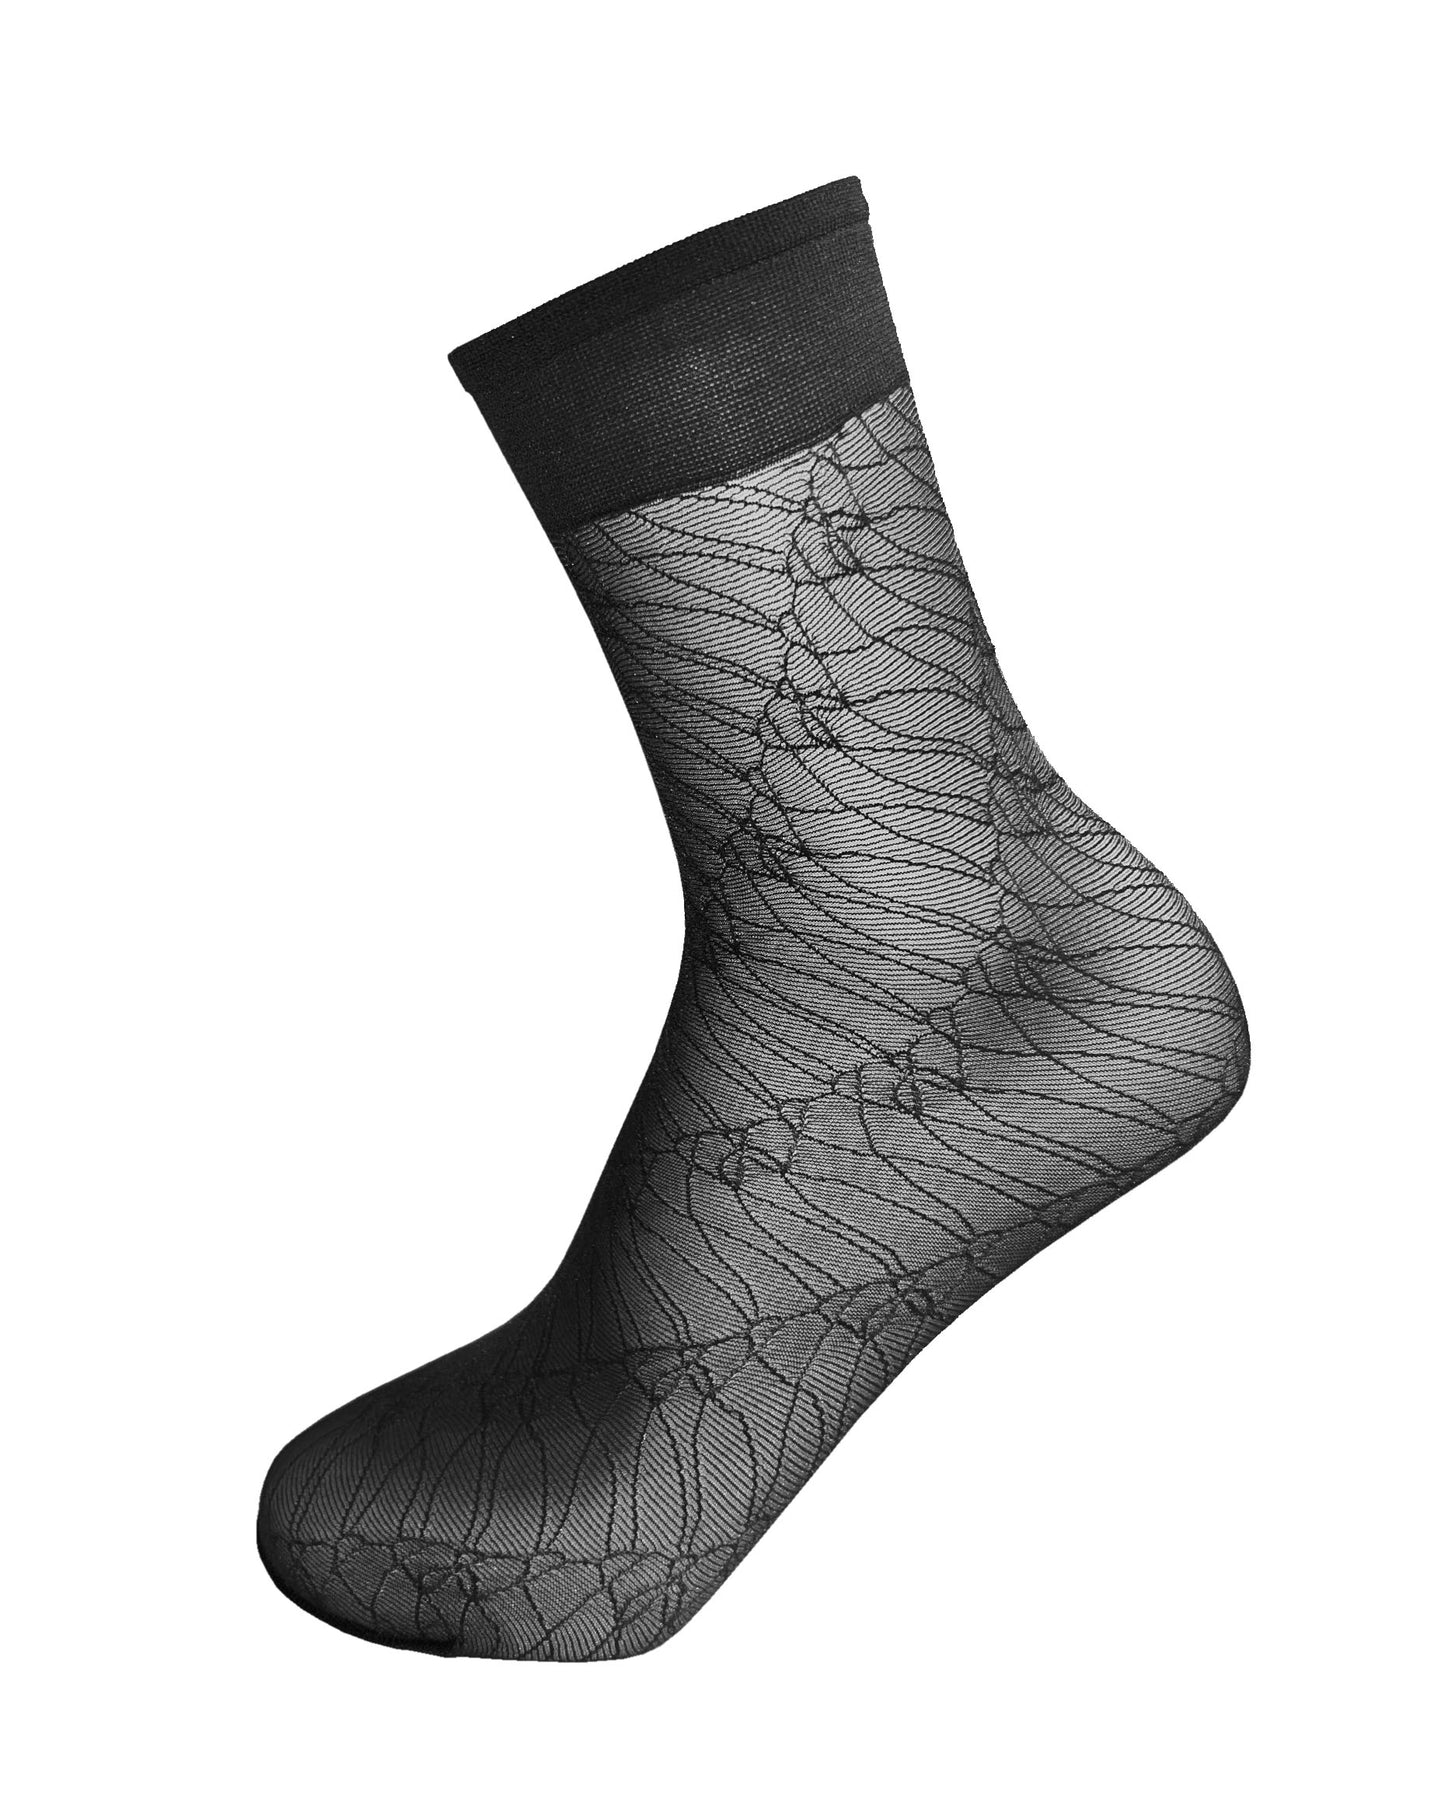 Omsa Grace Calzino - Sheer black fashion ankle socks with an all over messy scribbly linear style pattern and deep comfort cuff.